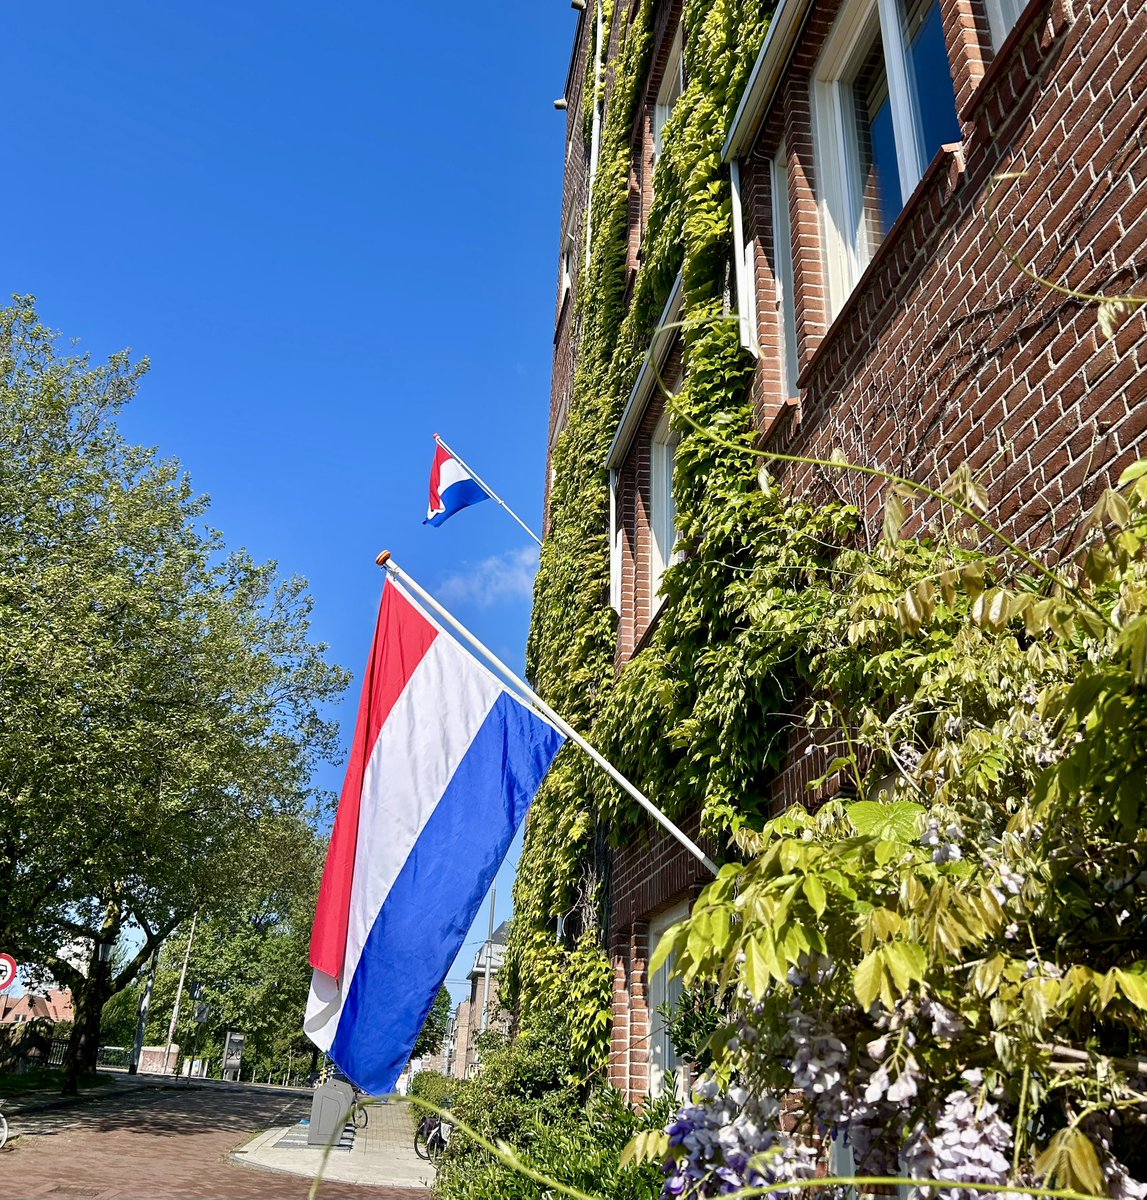 5 mei #Bevrijdingsdag #Amsterdam; #LiberationDay in #TheNetherlands 🇳🇱: